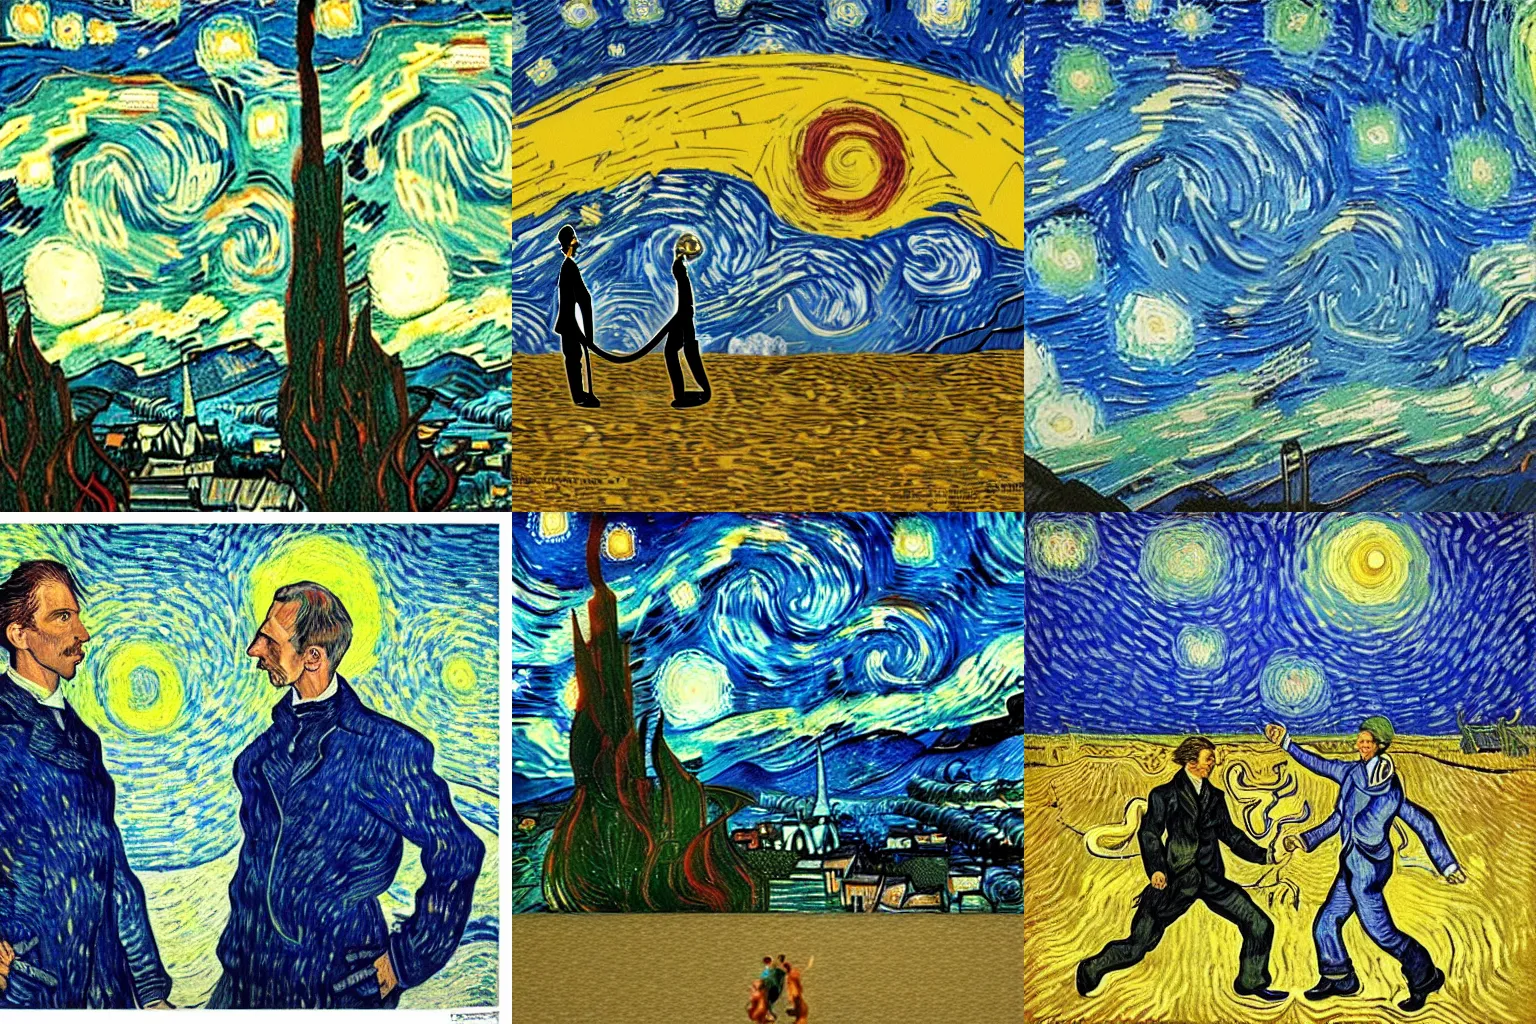 Prompt: erwin schroediger and nikola tesla fight each other in van gogh style